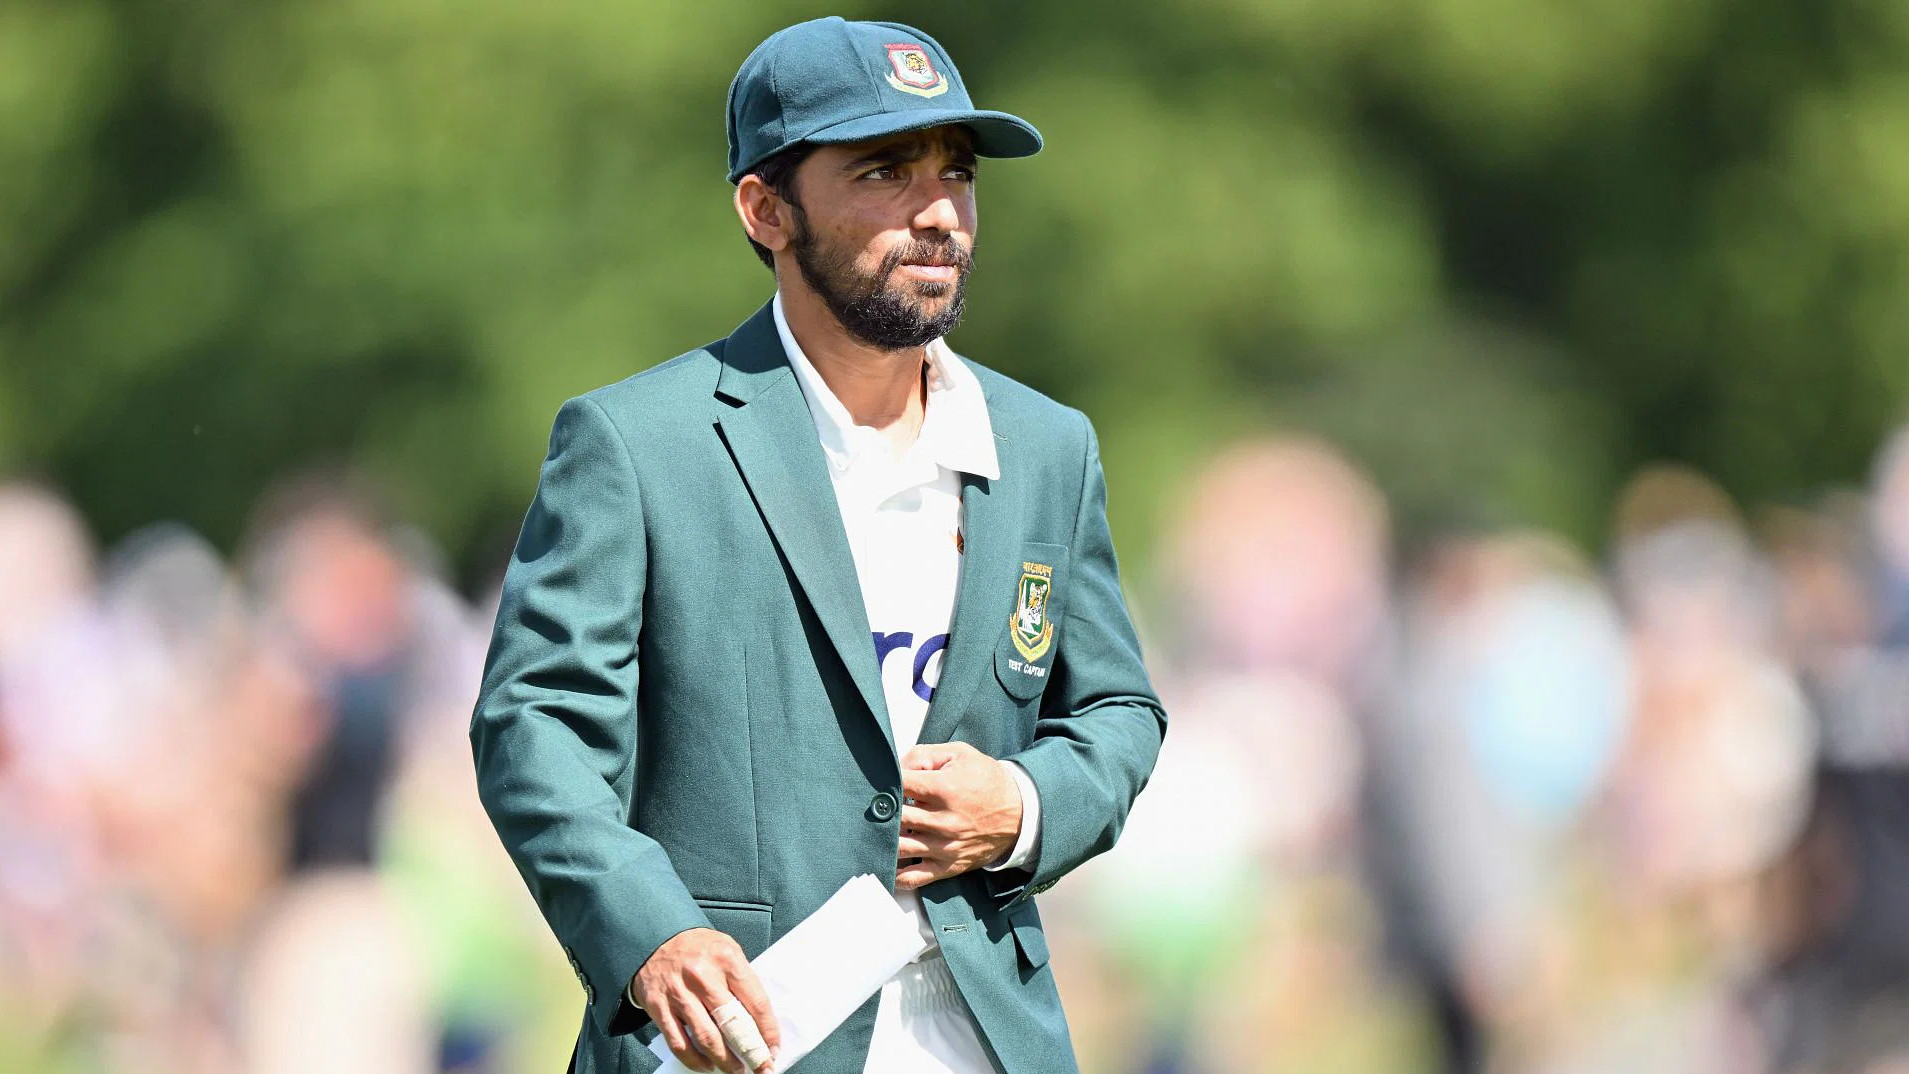 Mominul Haque steps down as Bangladesh Test captain